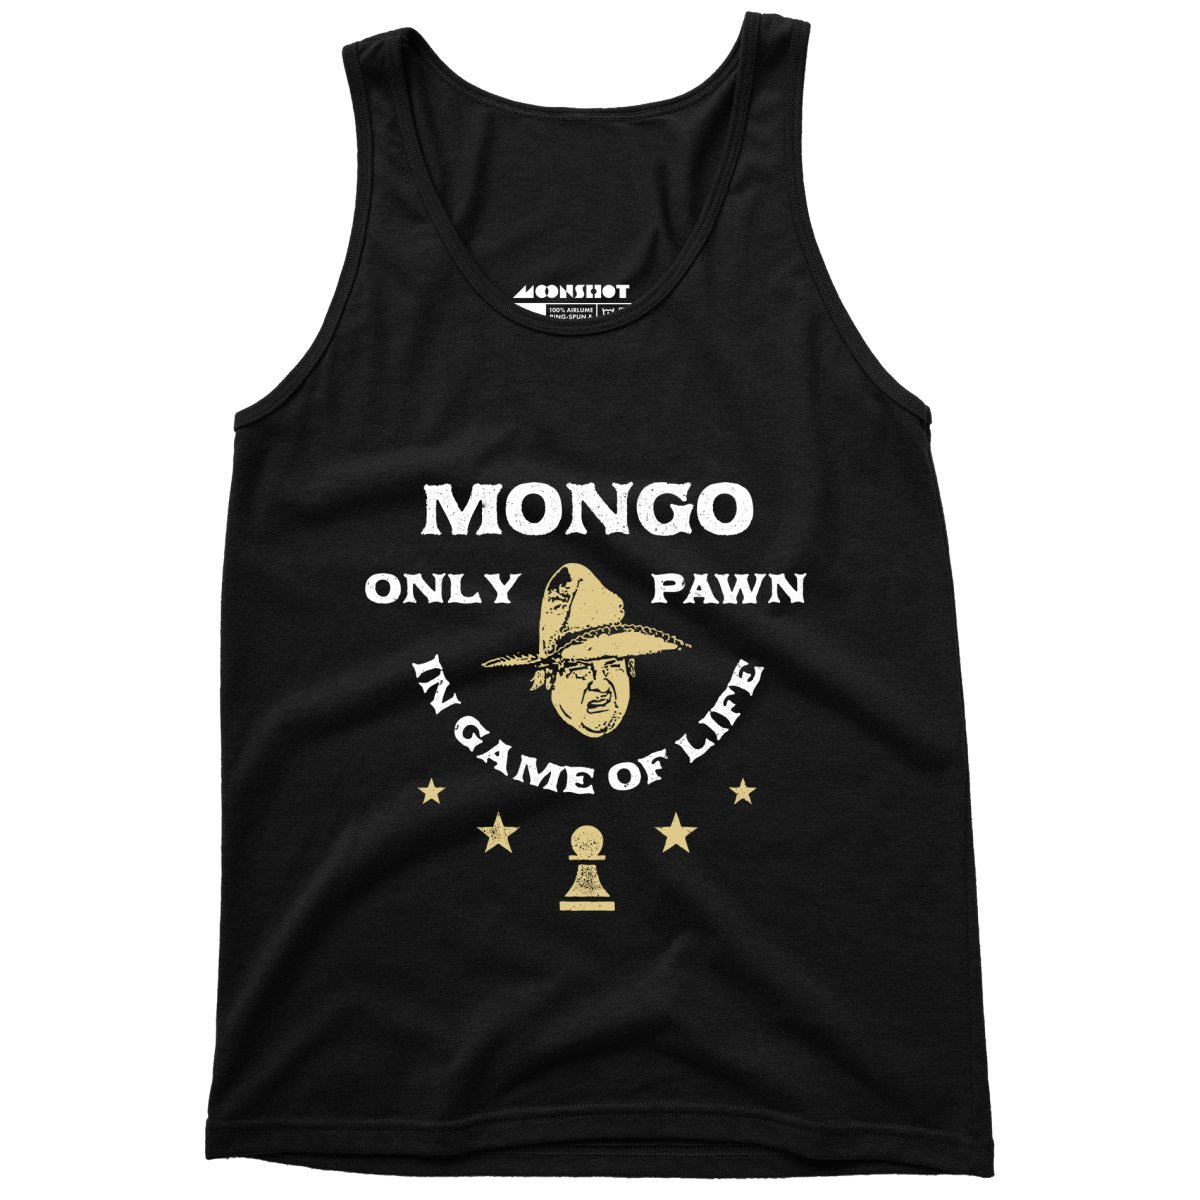 Mongo Only Pawn in Game of Life - Unisex Tank Top